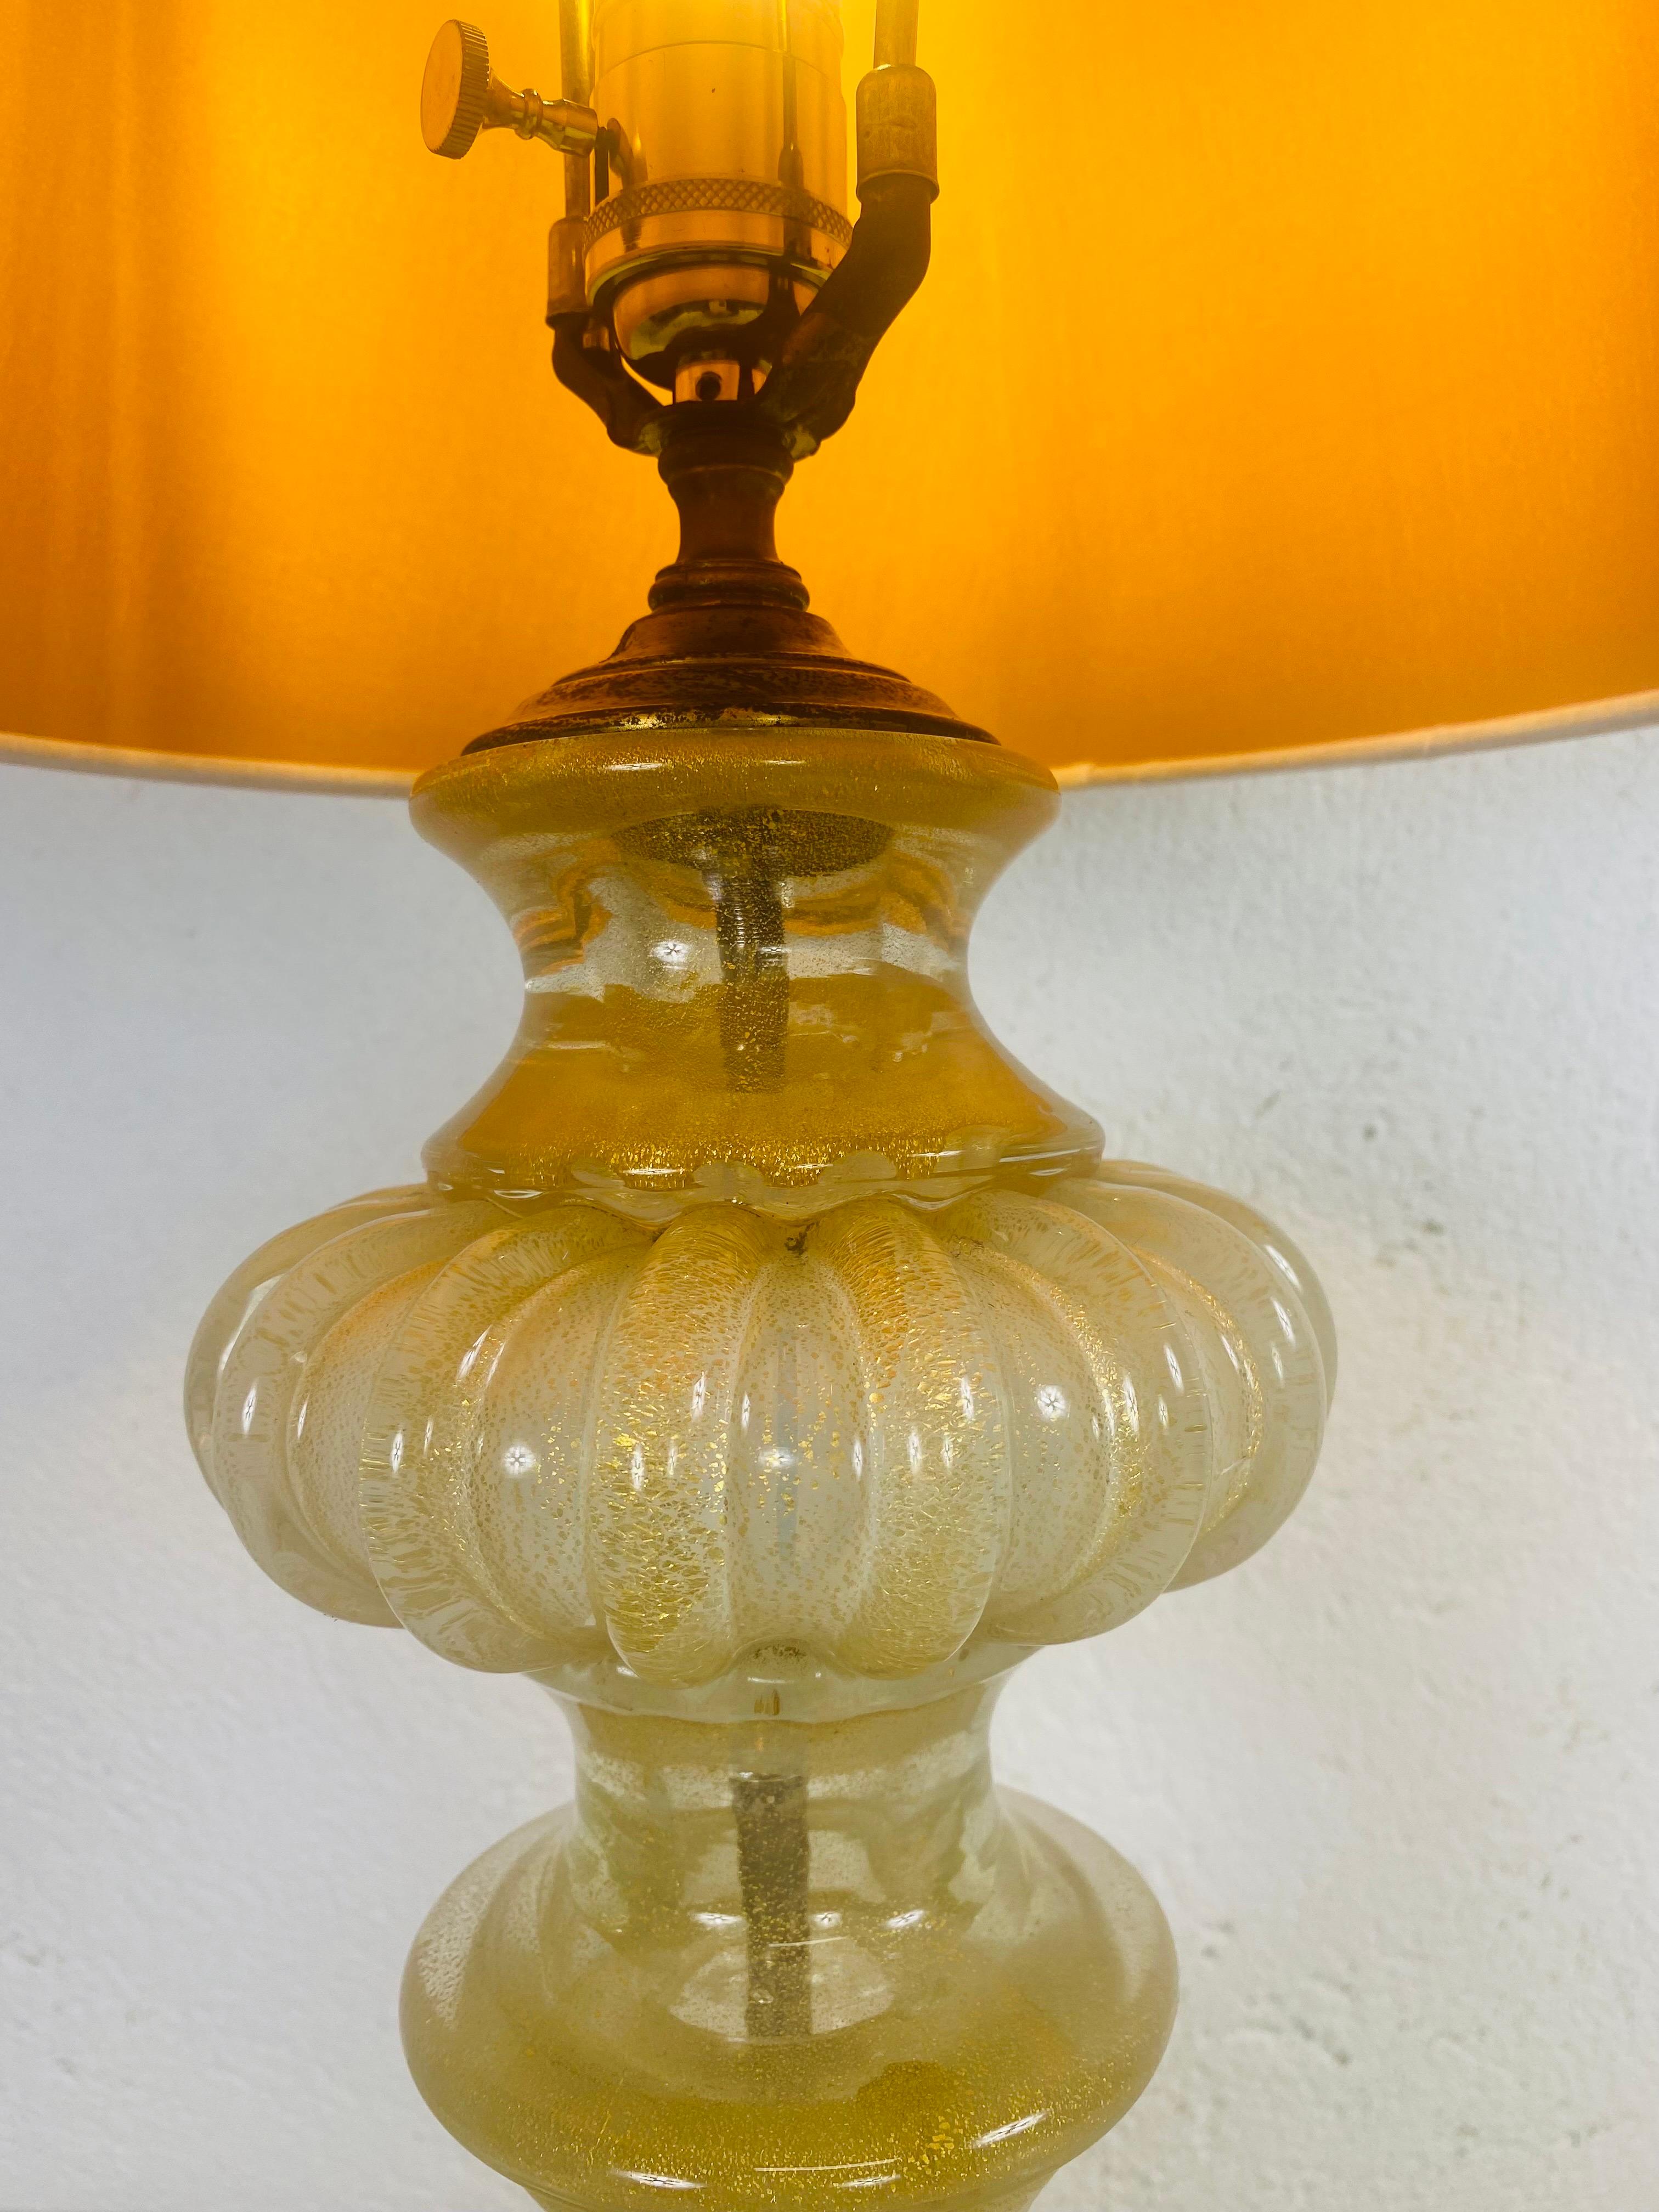 This is a stunning Italian Marano 24 karat gold fleck lamp by Barovier & Toso. This amazing Handblown Italian Marano lamp has a gold leafed Asian inspired base.The lamp is presented with a new linen shade with an amber undertone that complements the